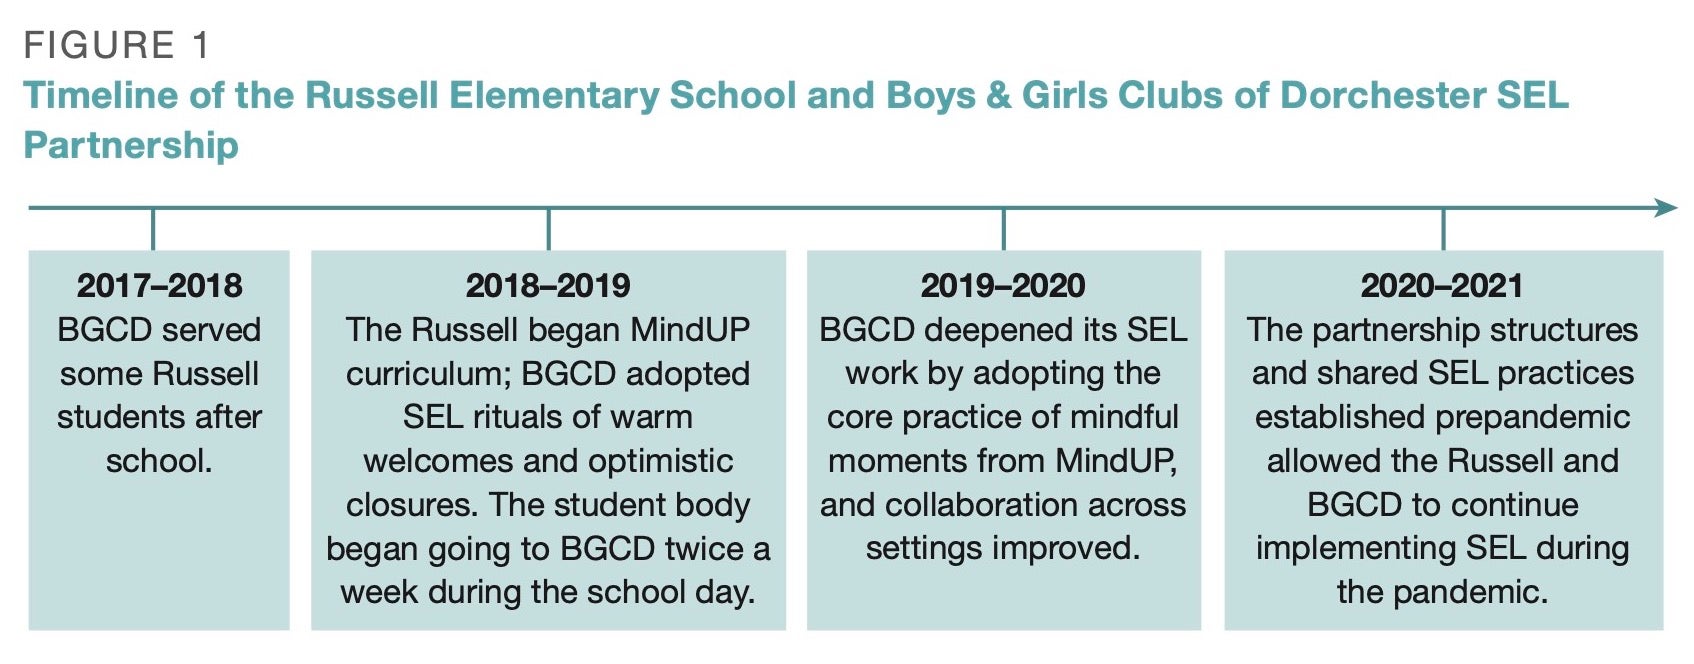 Timeline of the Russell Elementary School and Boys & Girls Clubs of Dorchester SEL Partnership